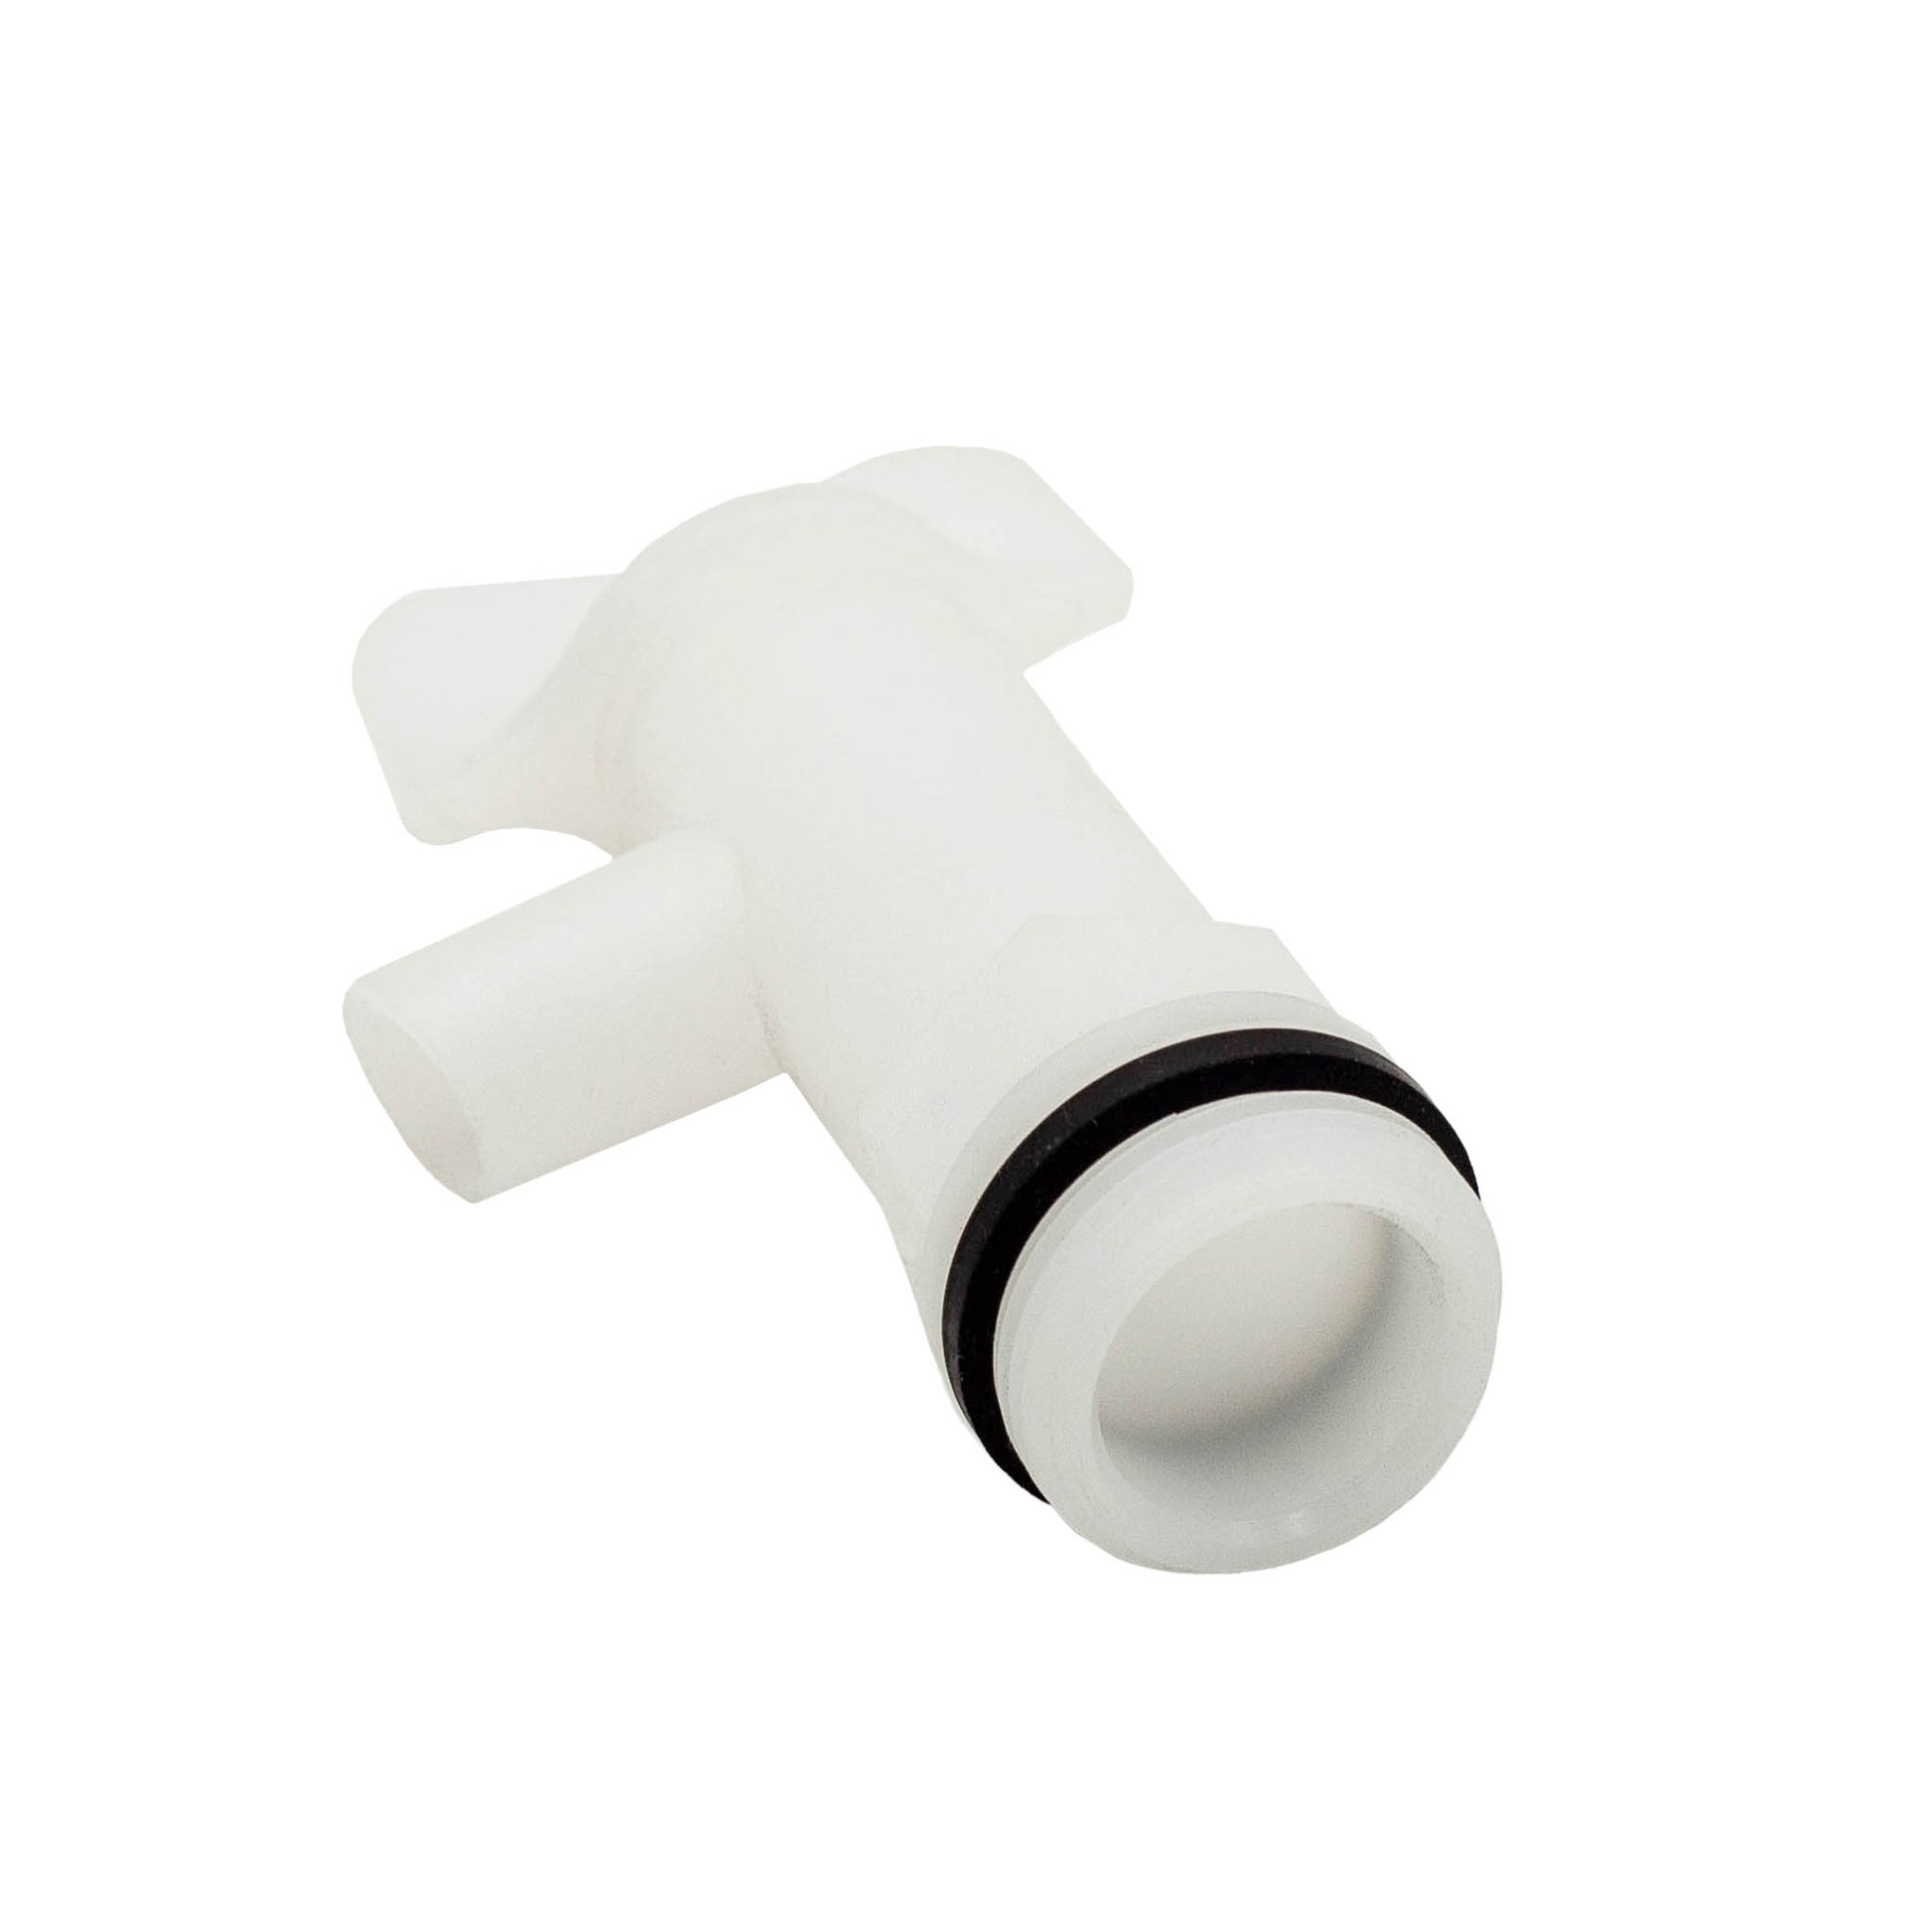 White plastic tap with 19mm thread to suit our 15, 30 and 60 litre plastic fermenters.